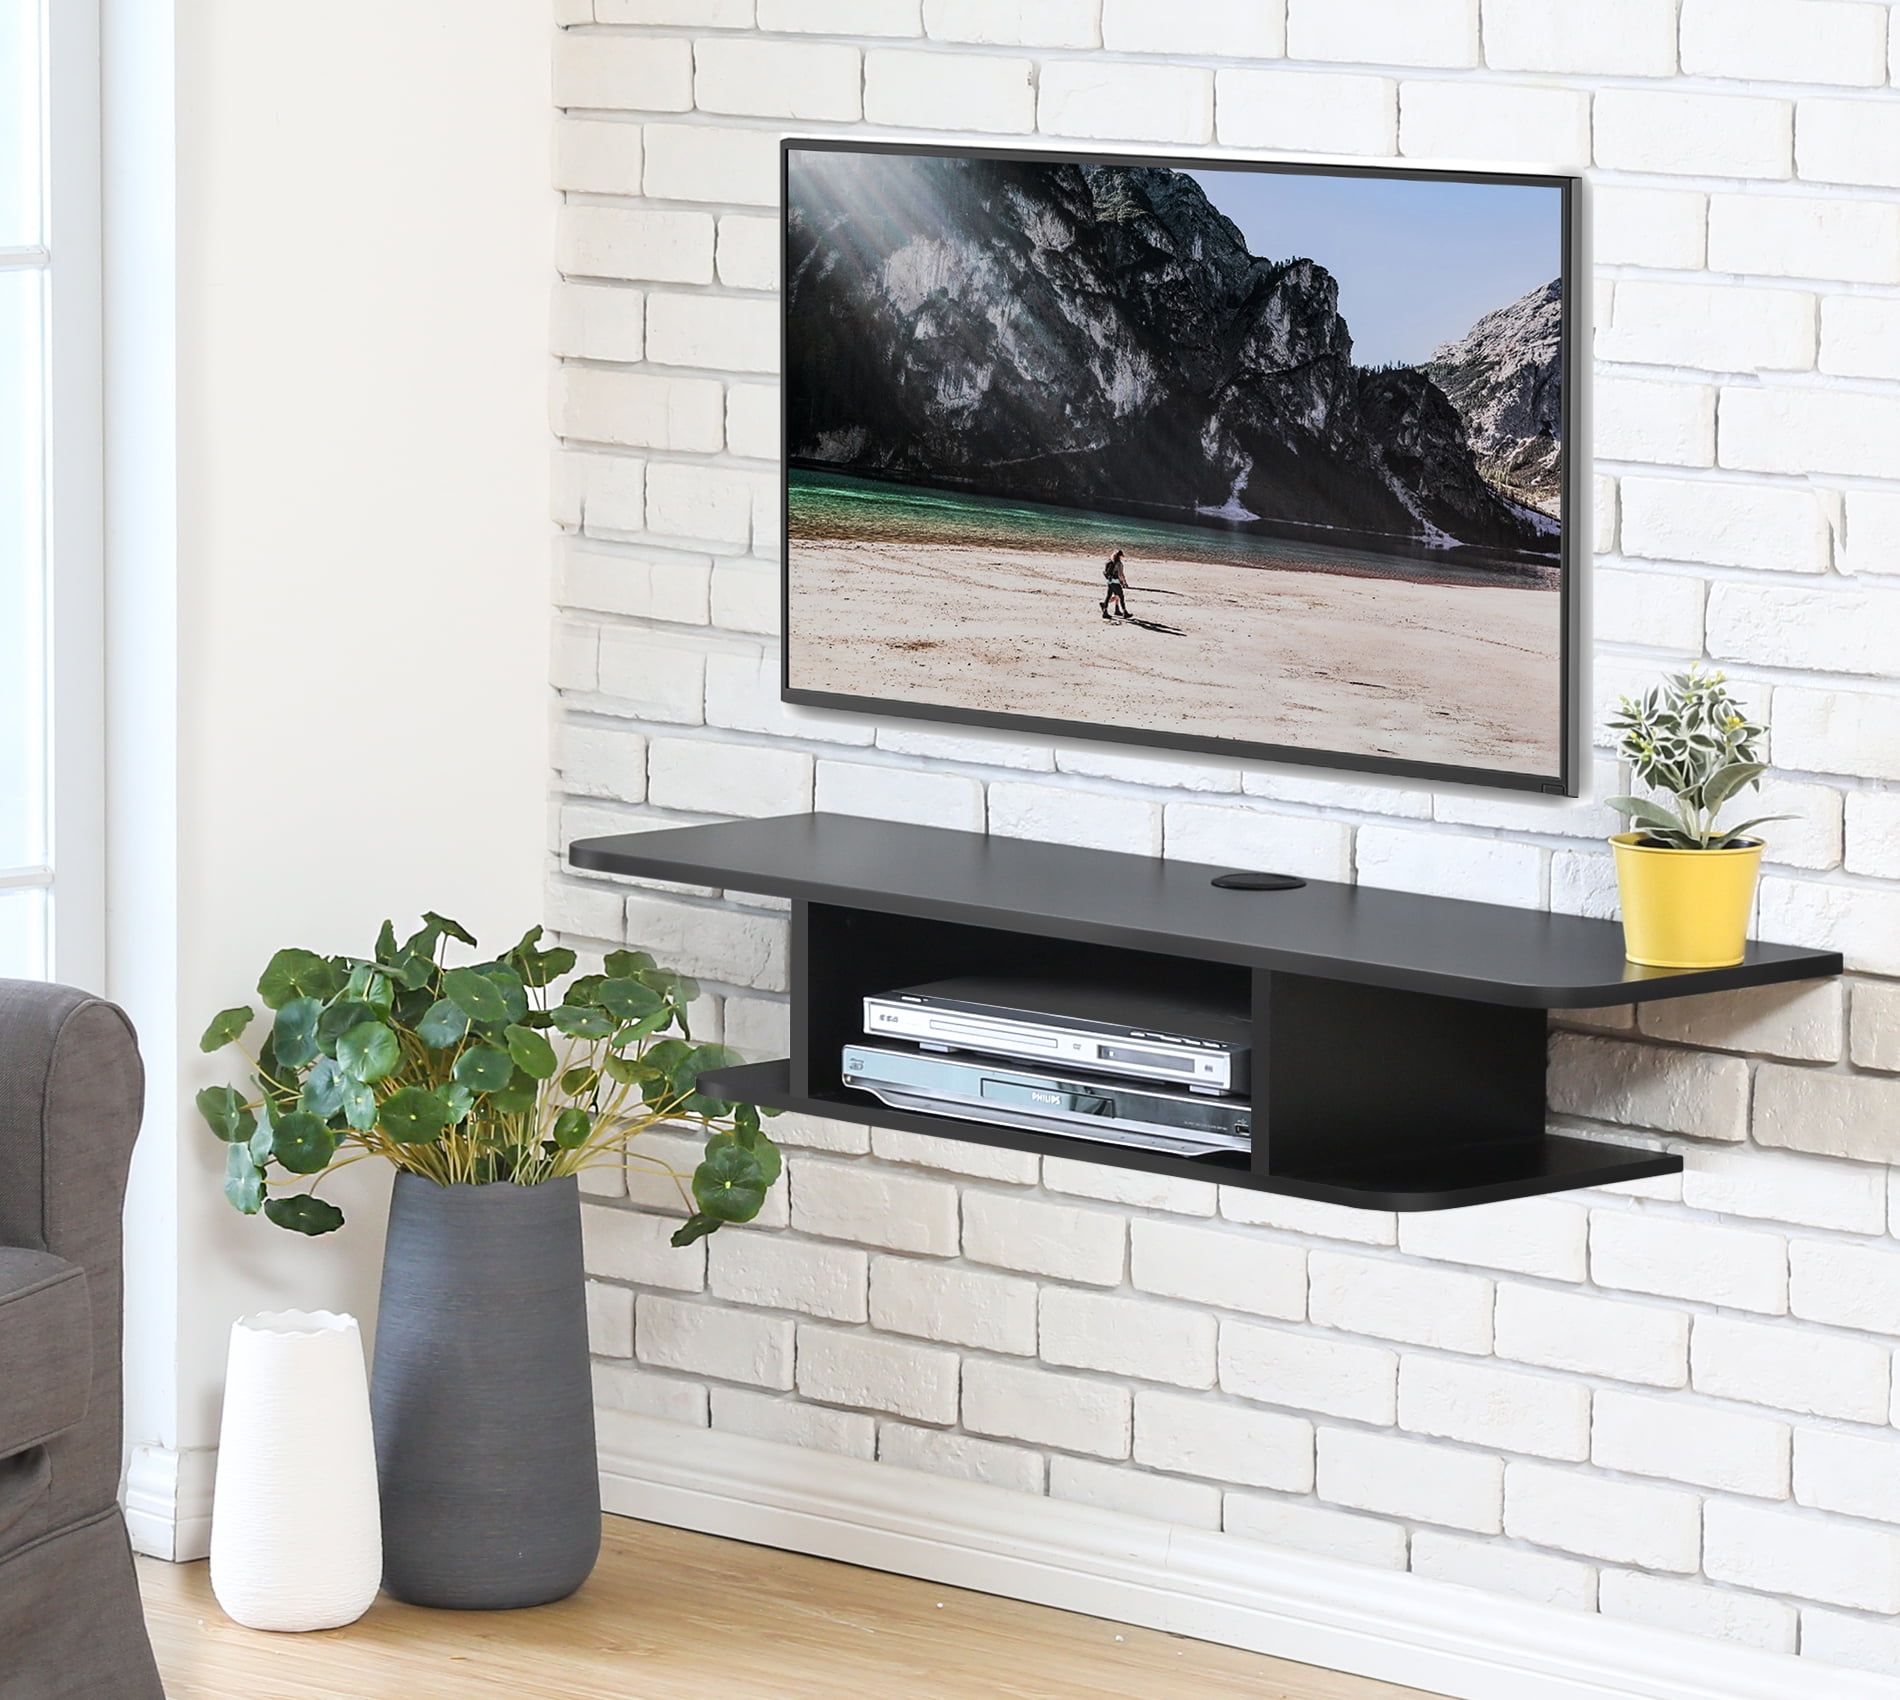 Fitueyes Wall Mounted Media Console,floating Tv Stand Component Shelf Throughout Top Shelf Mount Tv Stands (View 18 of 20)